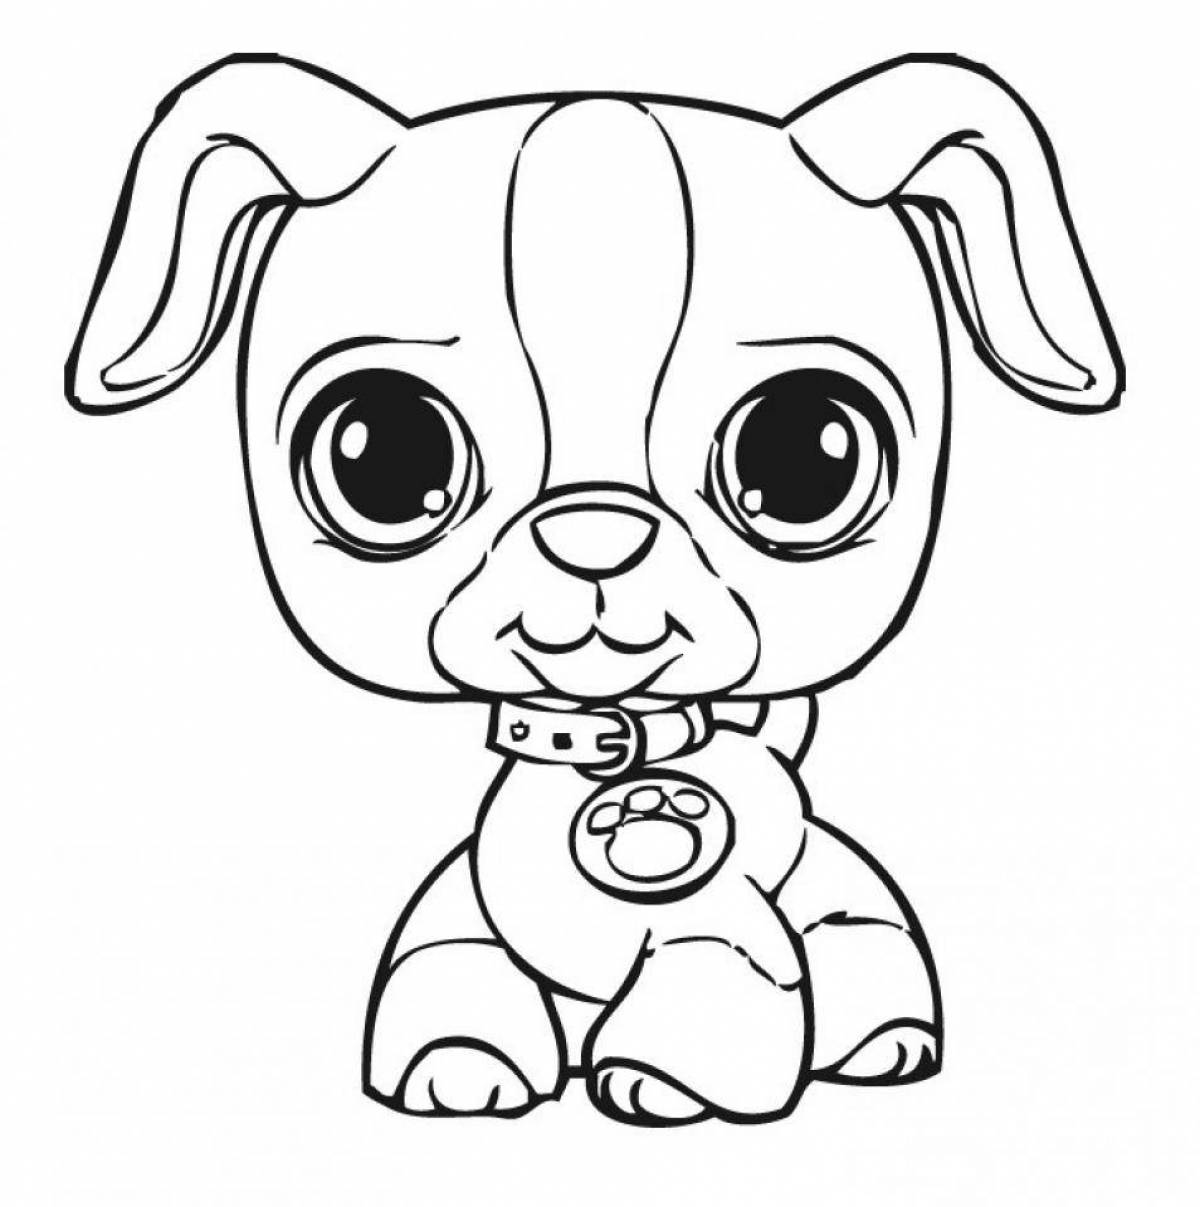 Coloring page cute and wavy dog